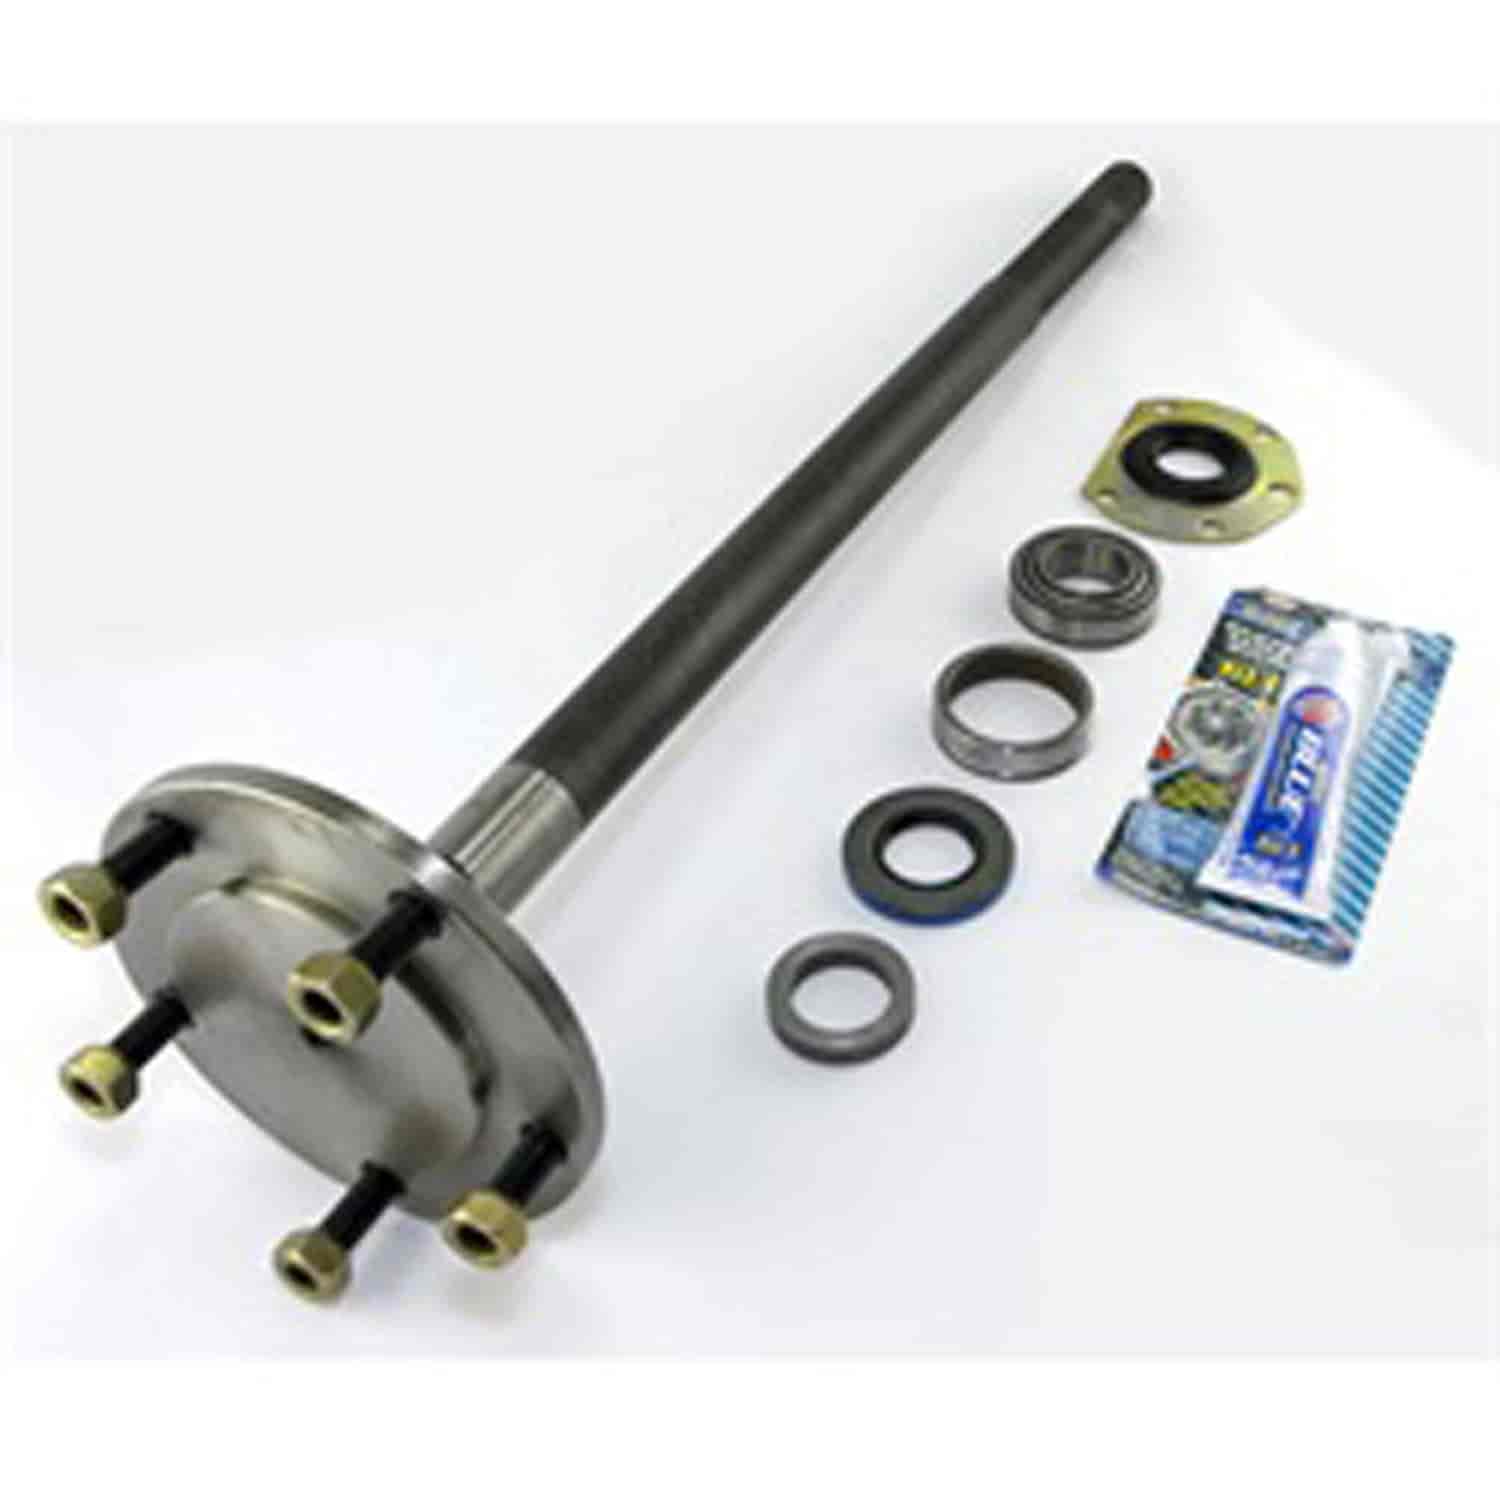 AMC20 1 piece Axle Kit With Green Bearings for 1982-86 Jeep CJ7 And CJ8 Scrambler Wide Track